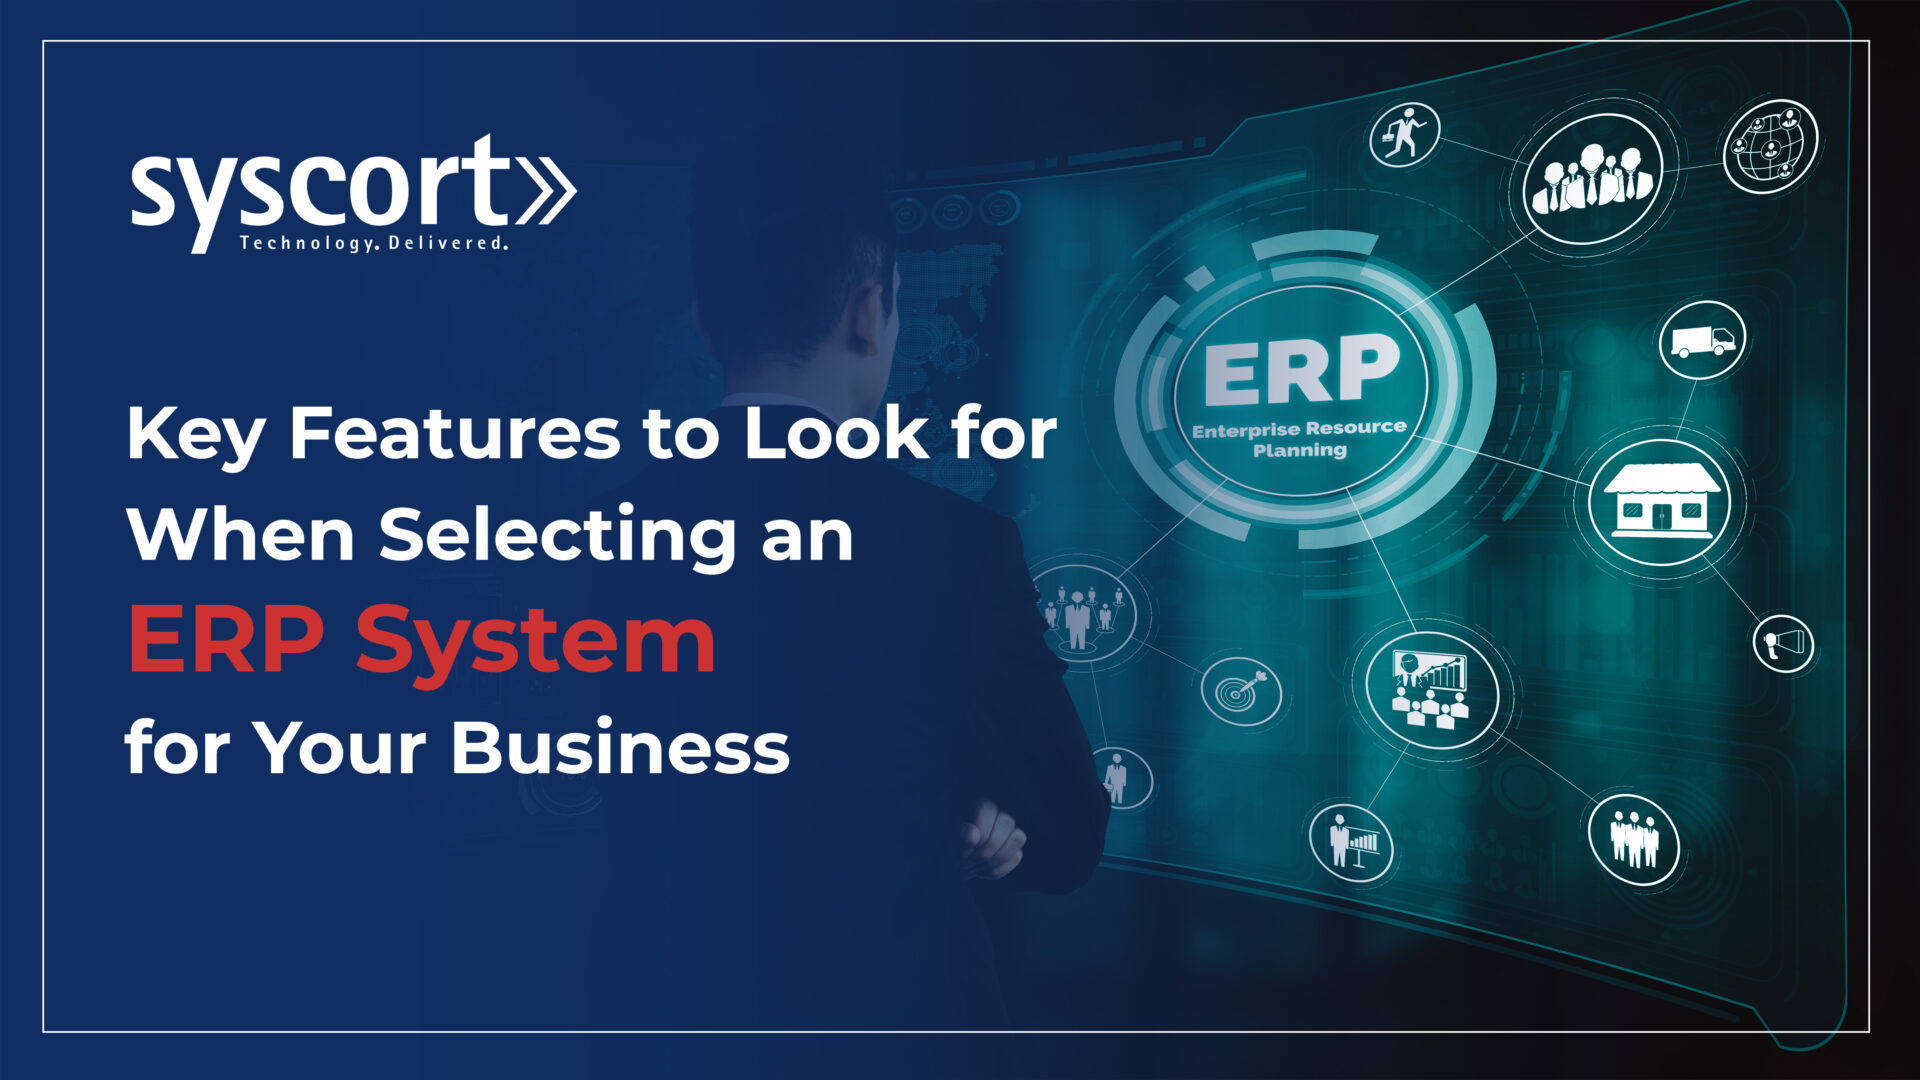 Key Features to Look for When Selecting an ERP System for Your Business